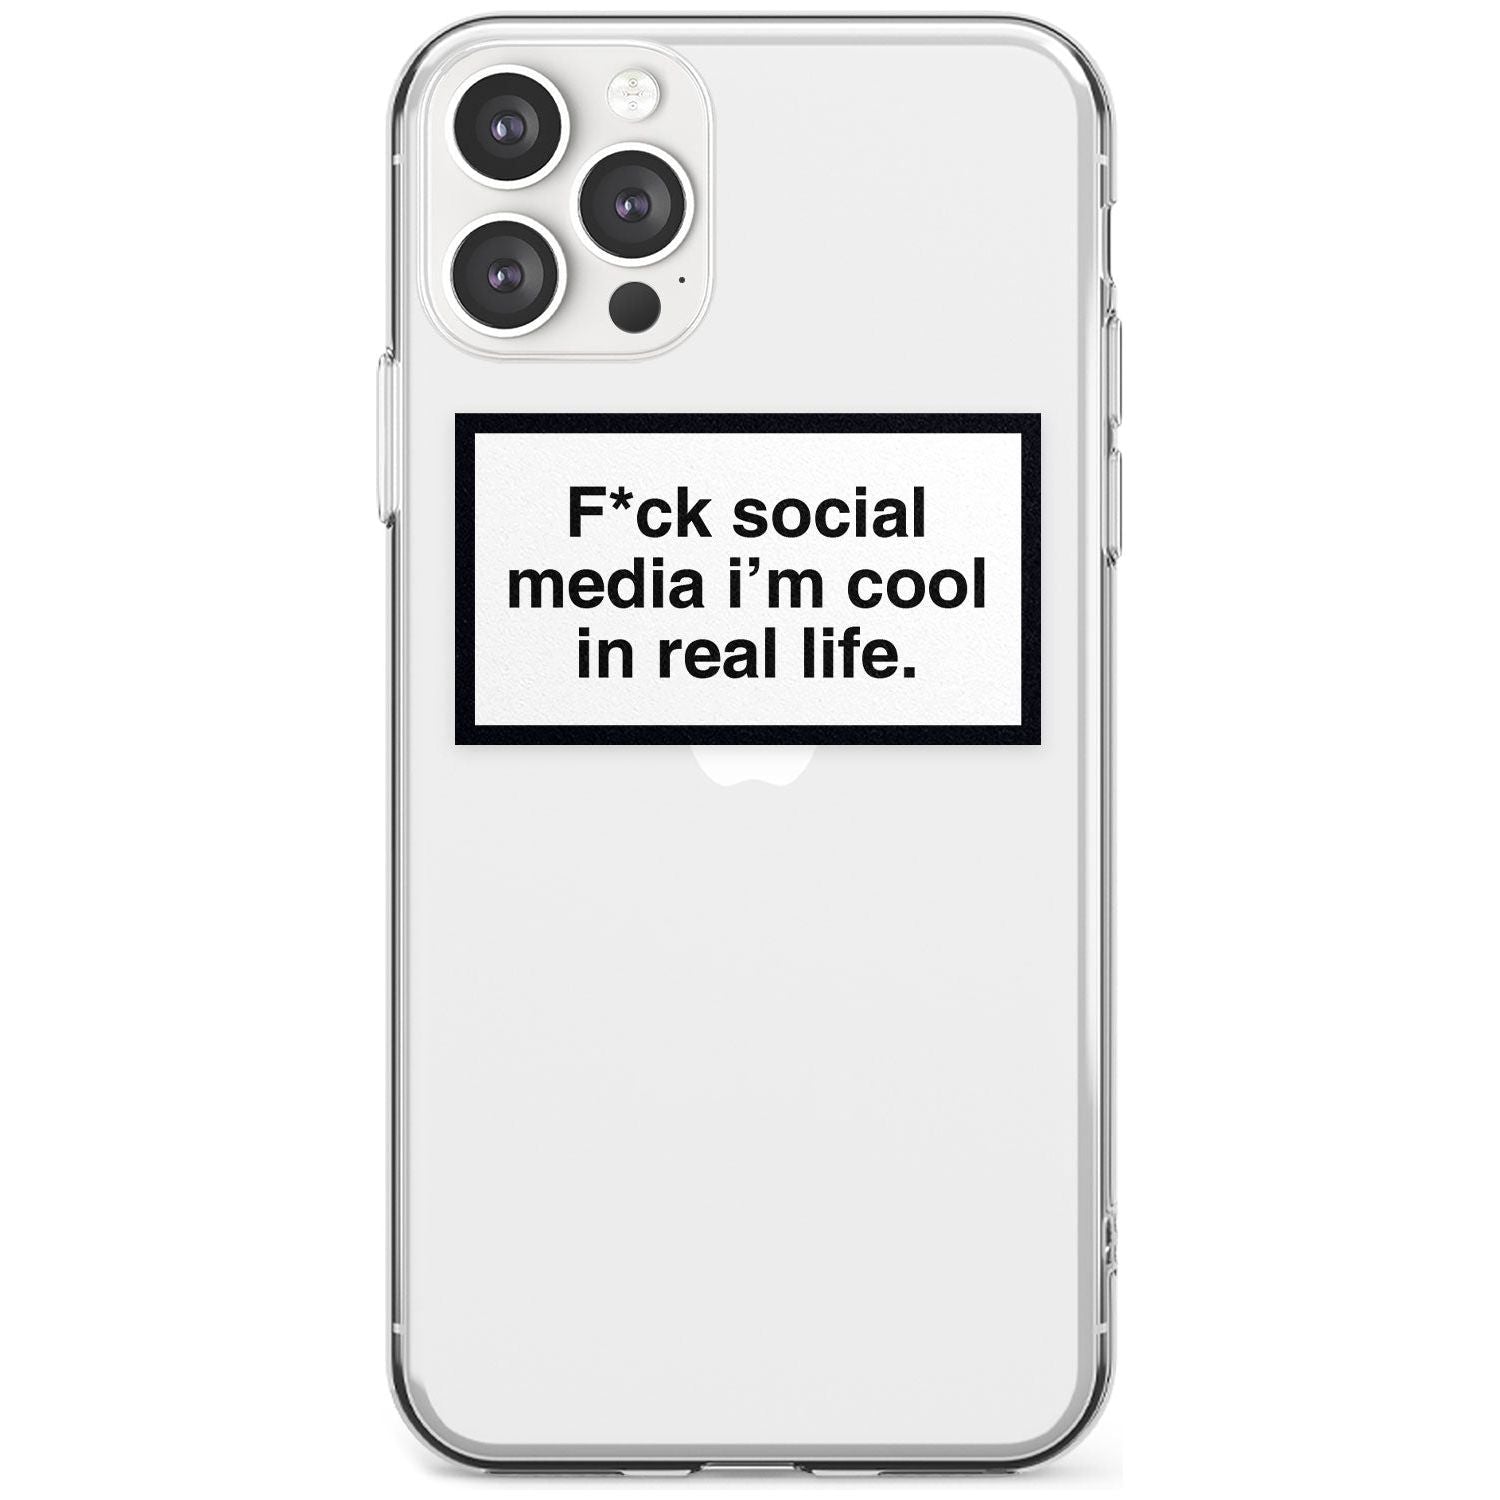 F*ck social media I'm cool in real life Black Impact Phone Case for iPhone 11 Pro Max